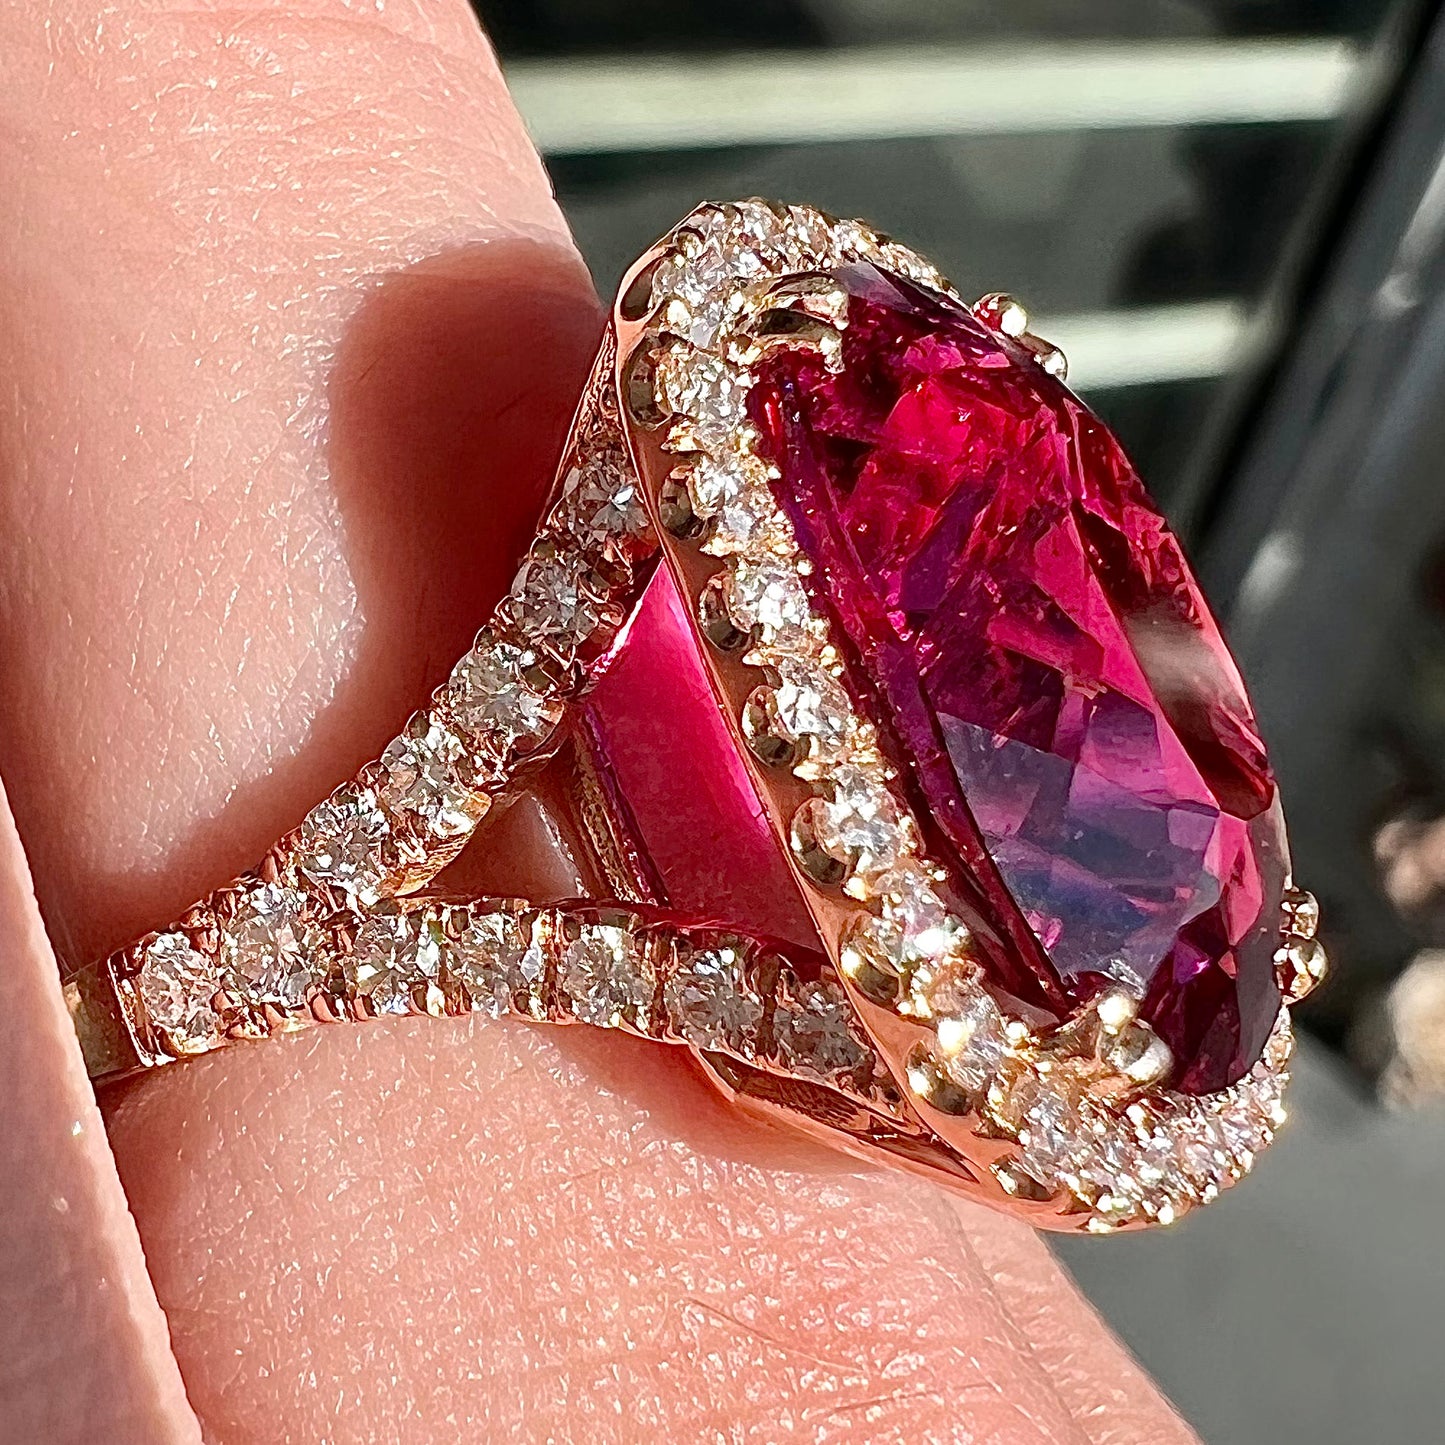 A rose gold, split shank engagement ring set with a cushion cut rubellite tourmaline in a diamond halo.